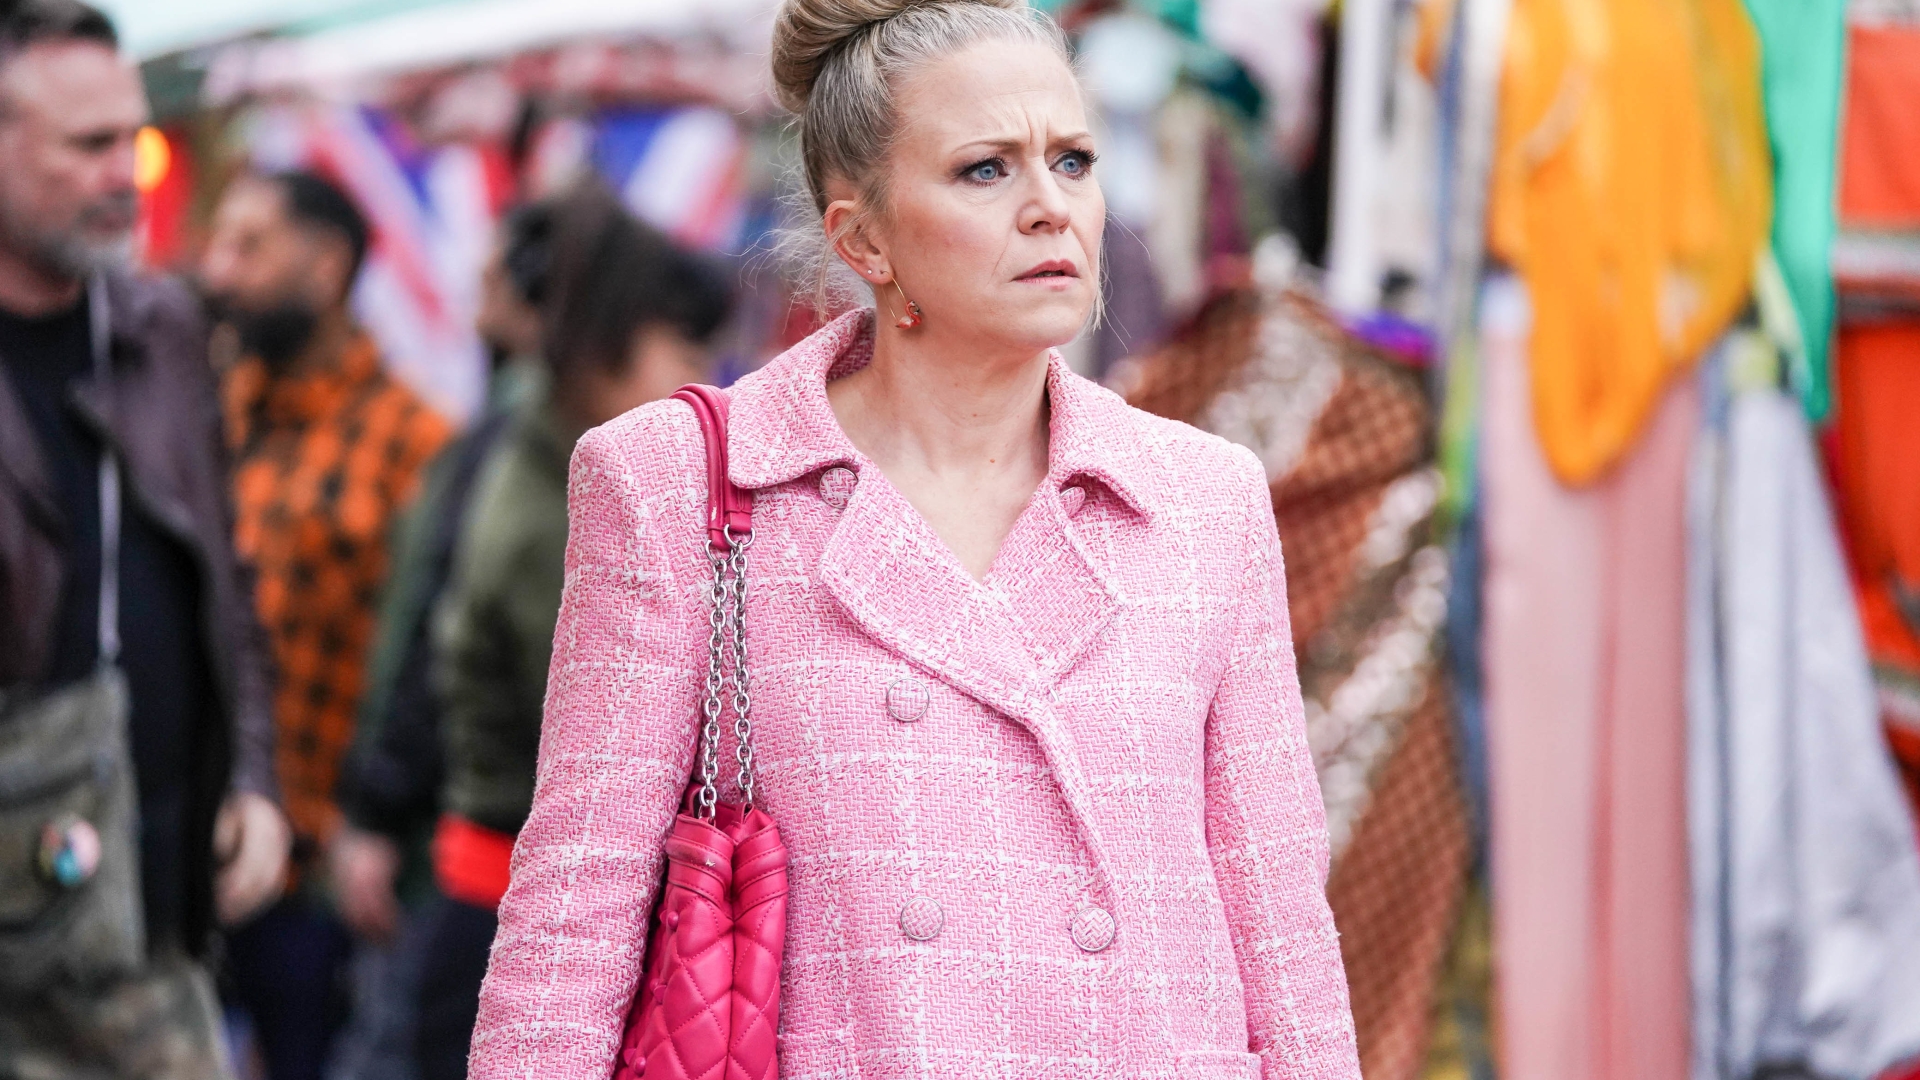 Linda Carter is a major distraction to BBC EastEnders’ fans as she celebrates her Coronation.